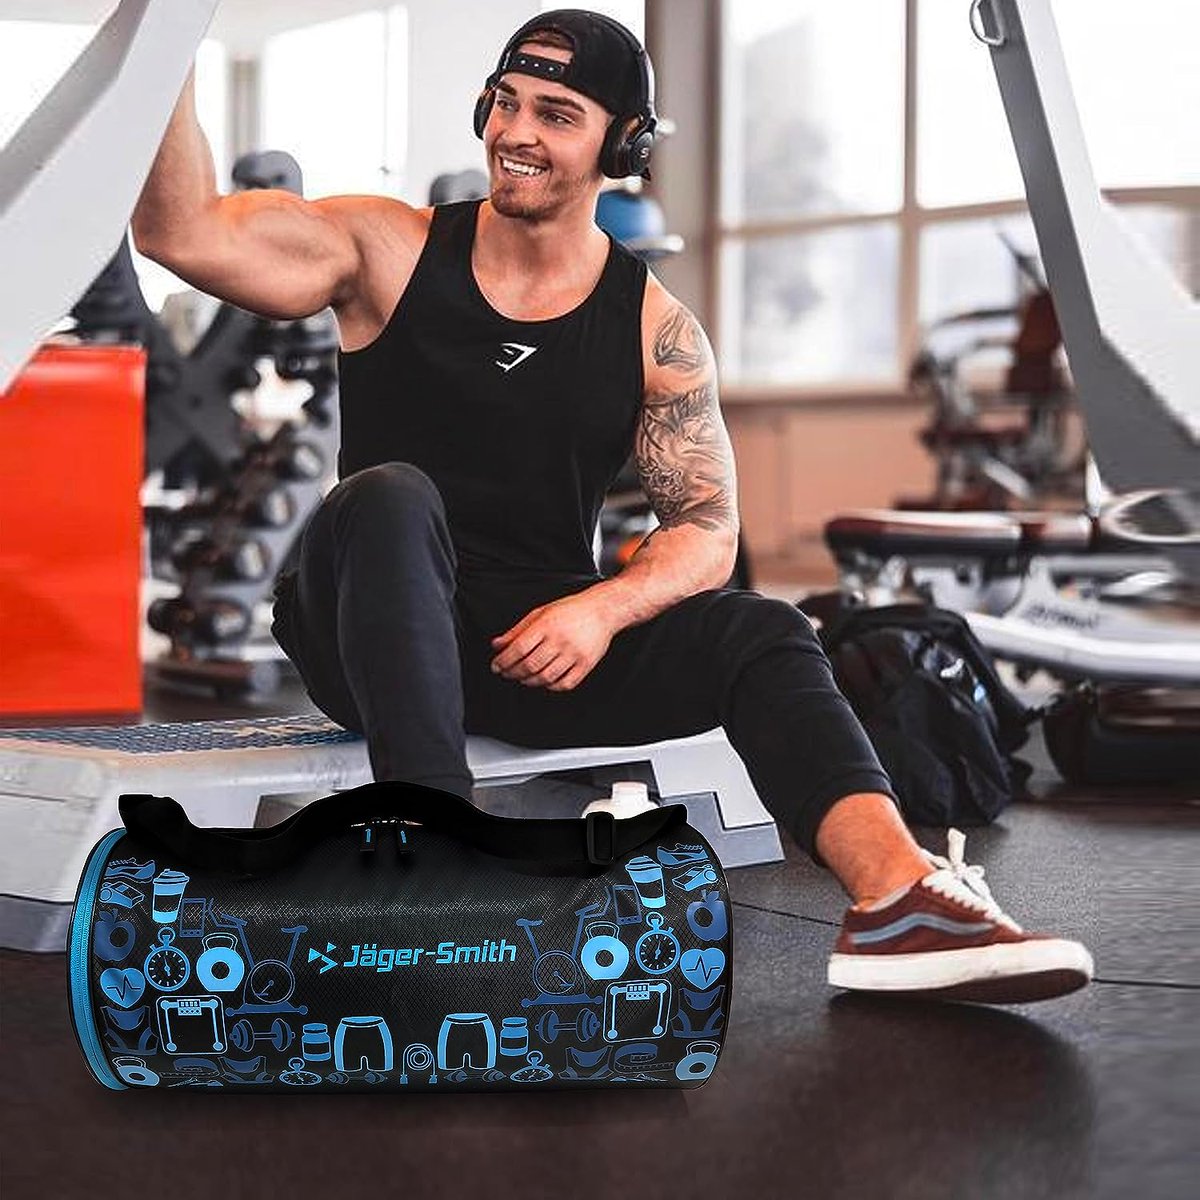 Elevate your fitness game with the Jager-Smith GB 500 gym bag – where style meets functionality! 🏋️‍♂️👟
amzn.to/3EpFqD0
#GymEssentials
#FitnessBag
#WorkoutCompanion
#GymLife
#SportyStyle
#ActiveLifestyle
#AthleticGear
#ShoeCompartment
#MulticolorBag